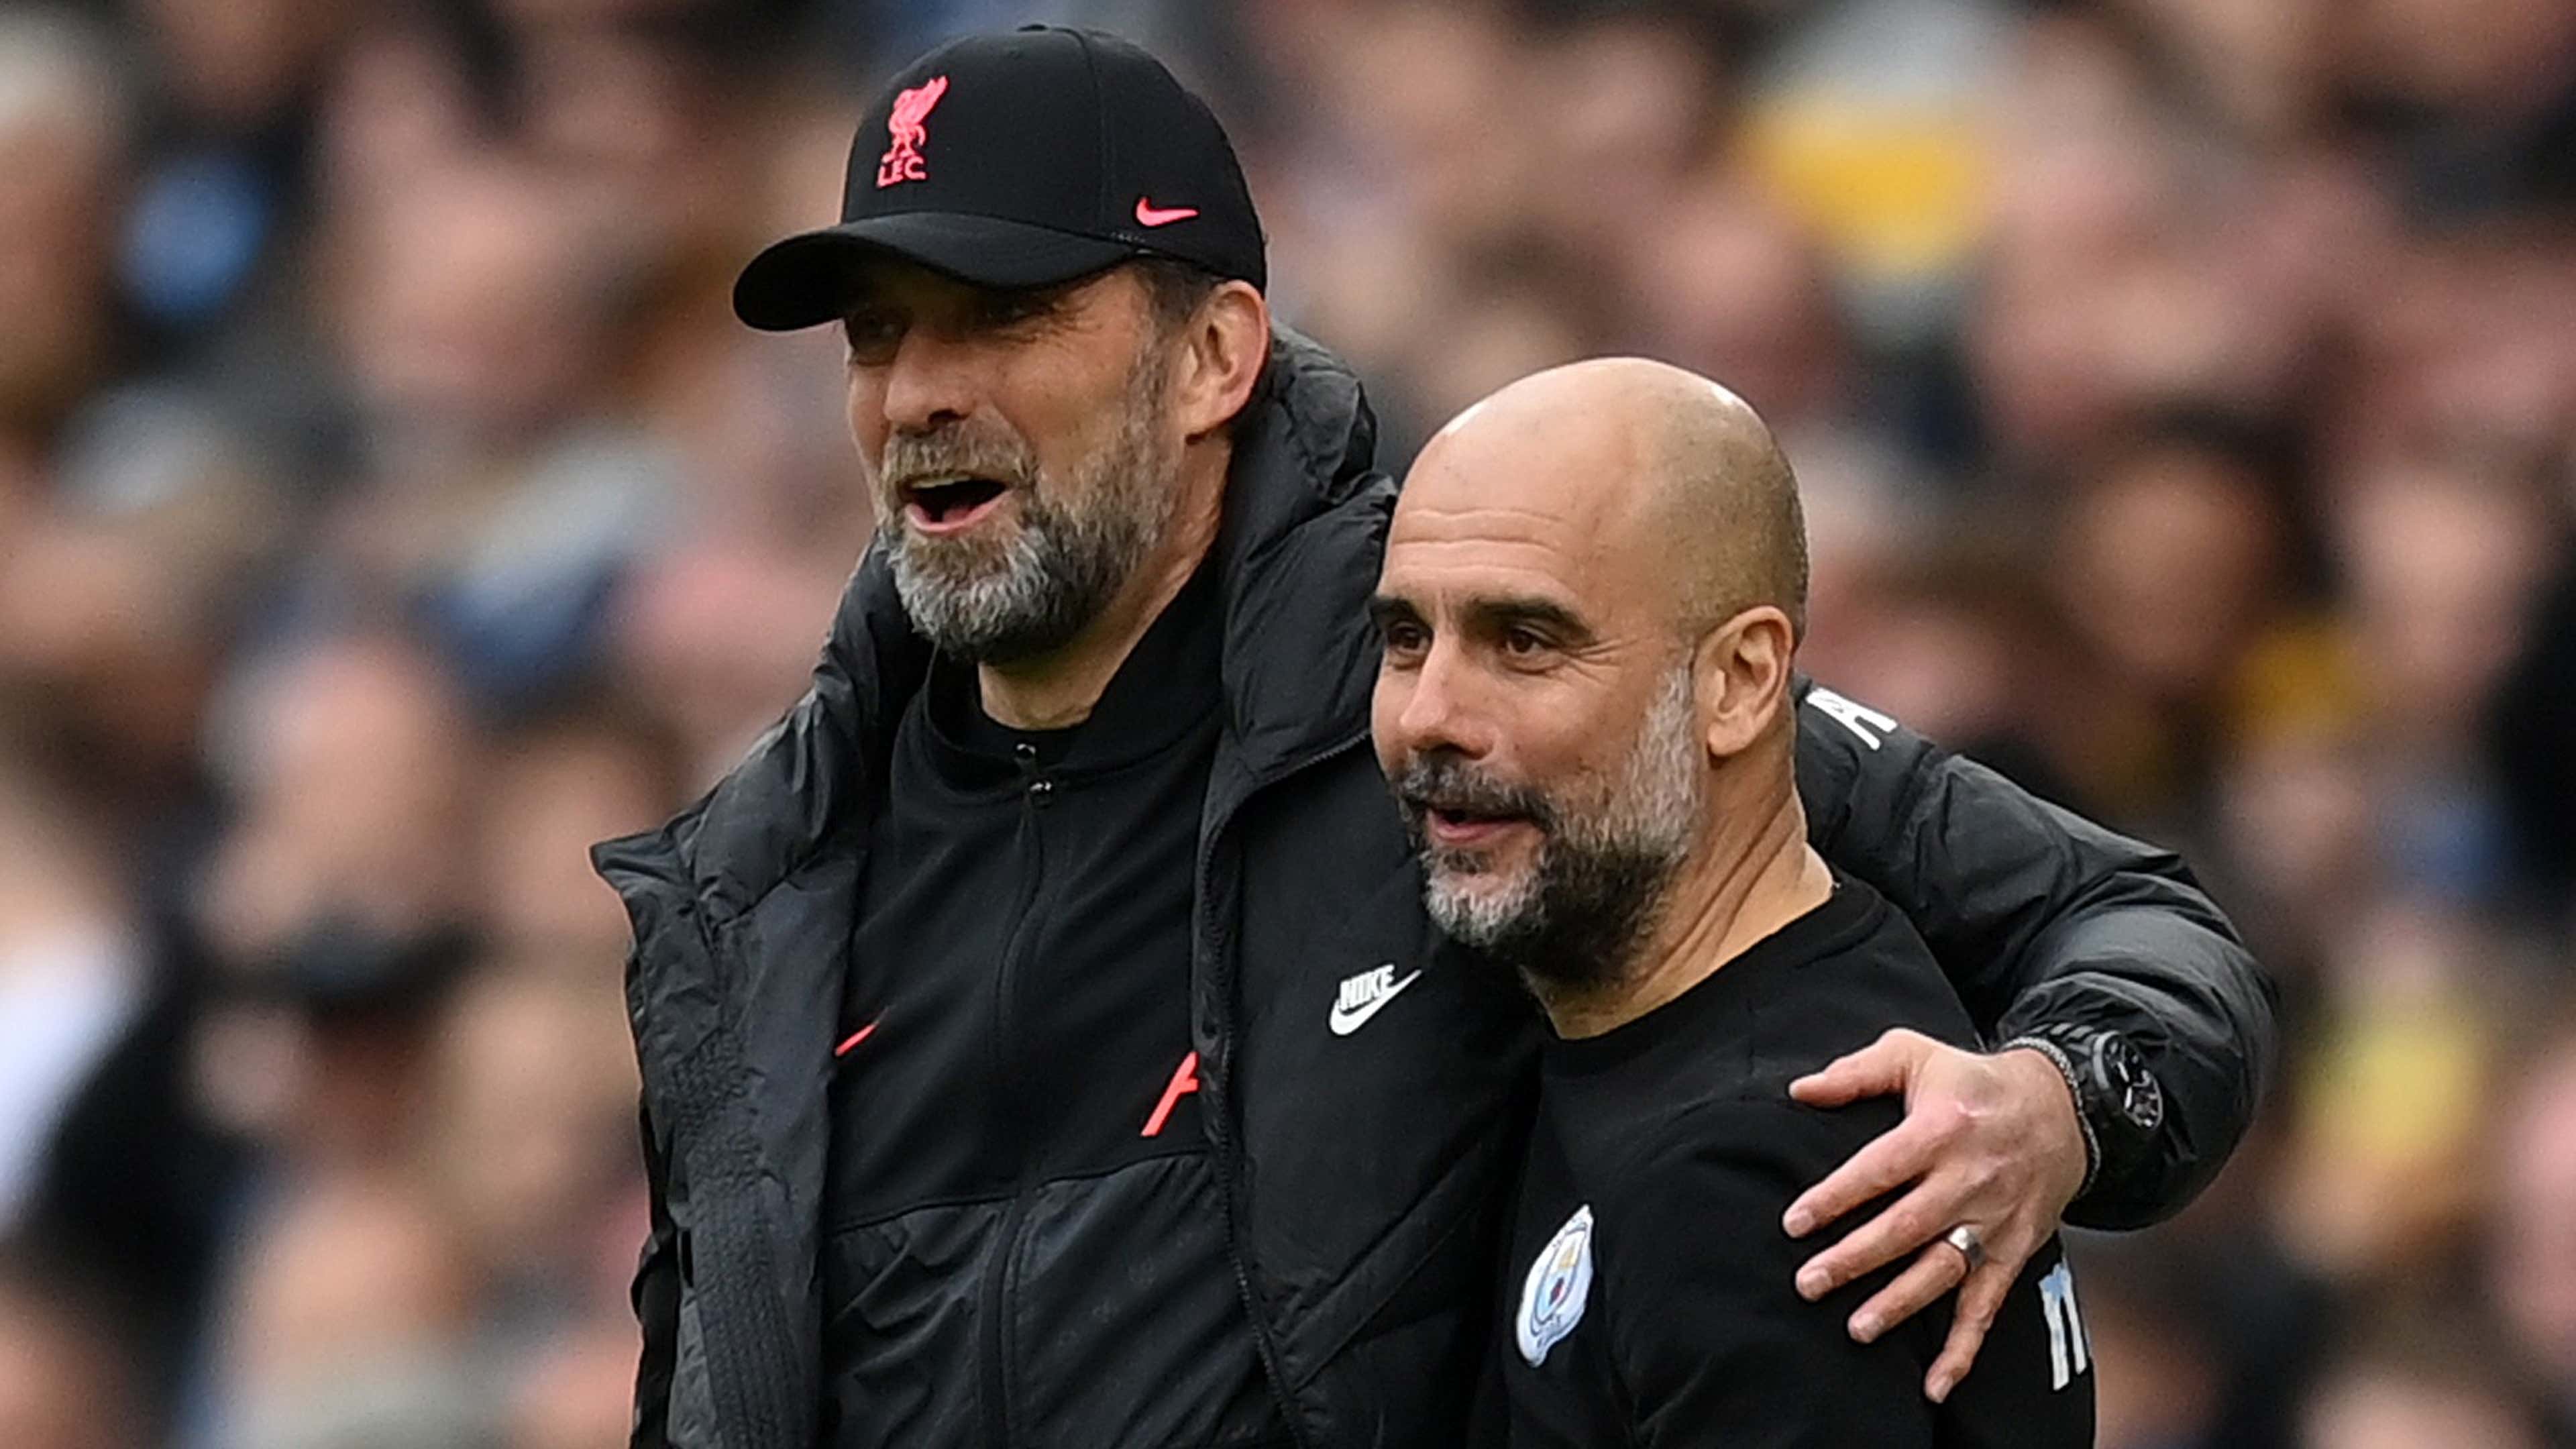 Two top-class managers. One at a very classy club like Liverpool, and there are 115 reasons to believe why Manchester City are where they are only because of Pep Guardiola.